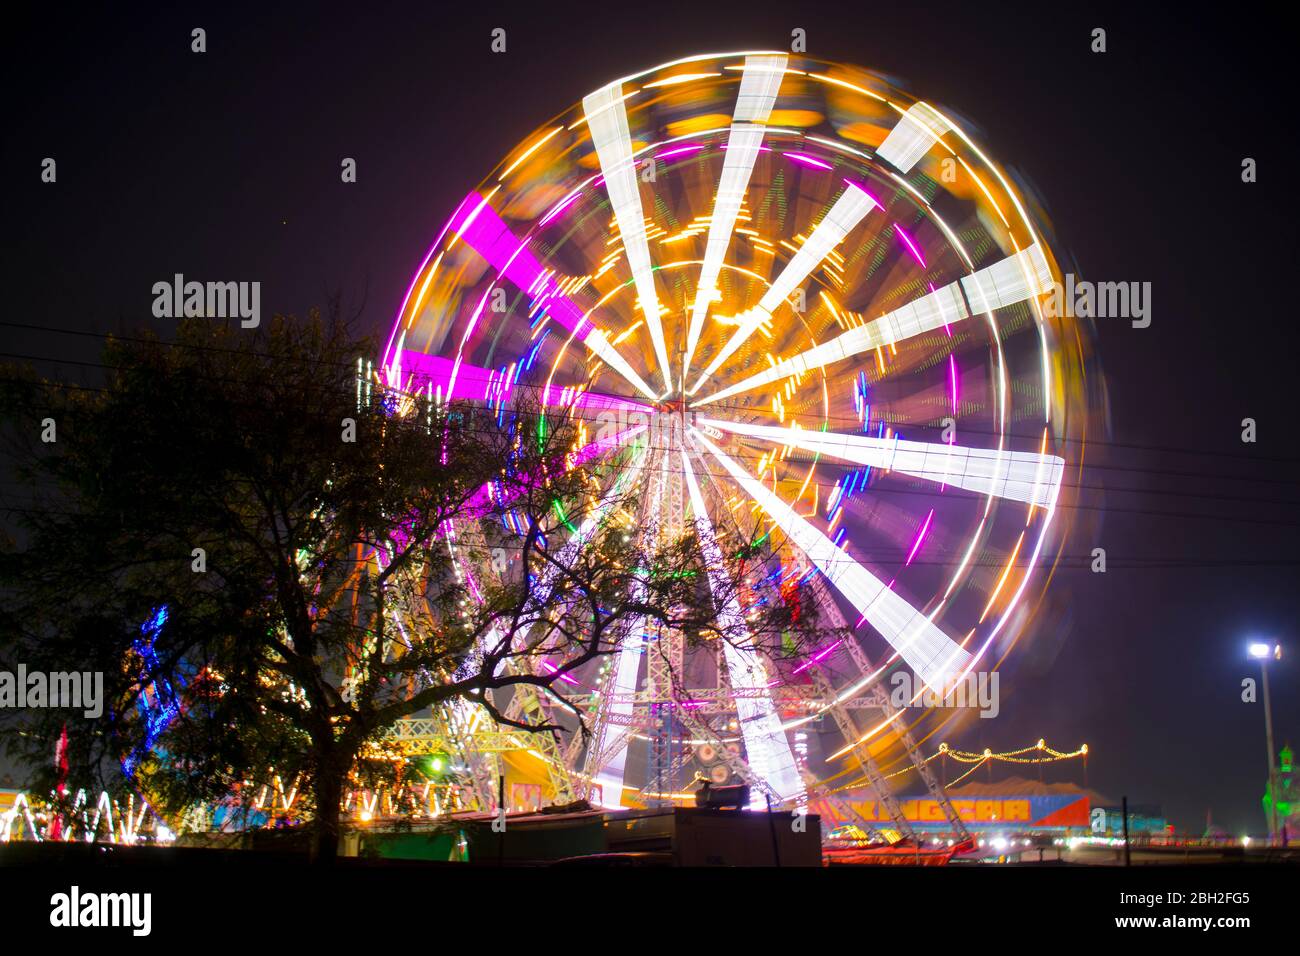 A nighttime view of the Ferris wheel in India with slow sutters speed Stock Photo